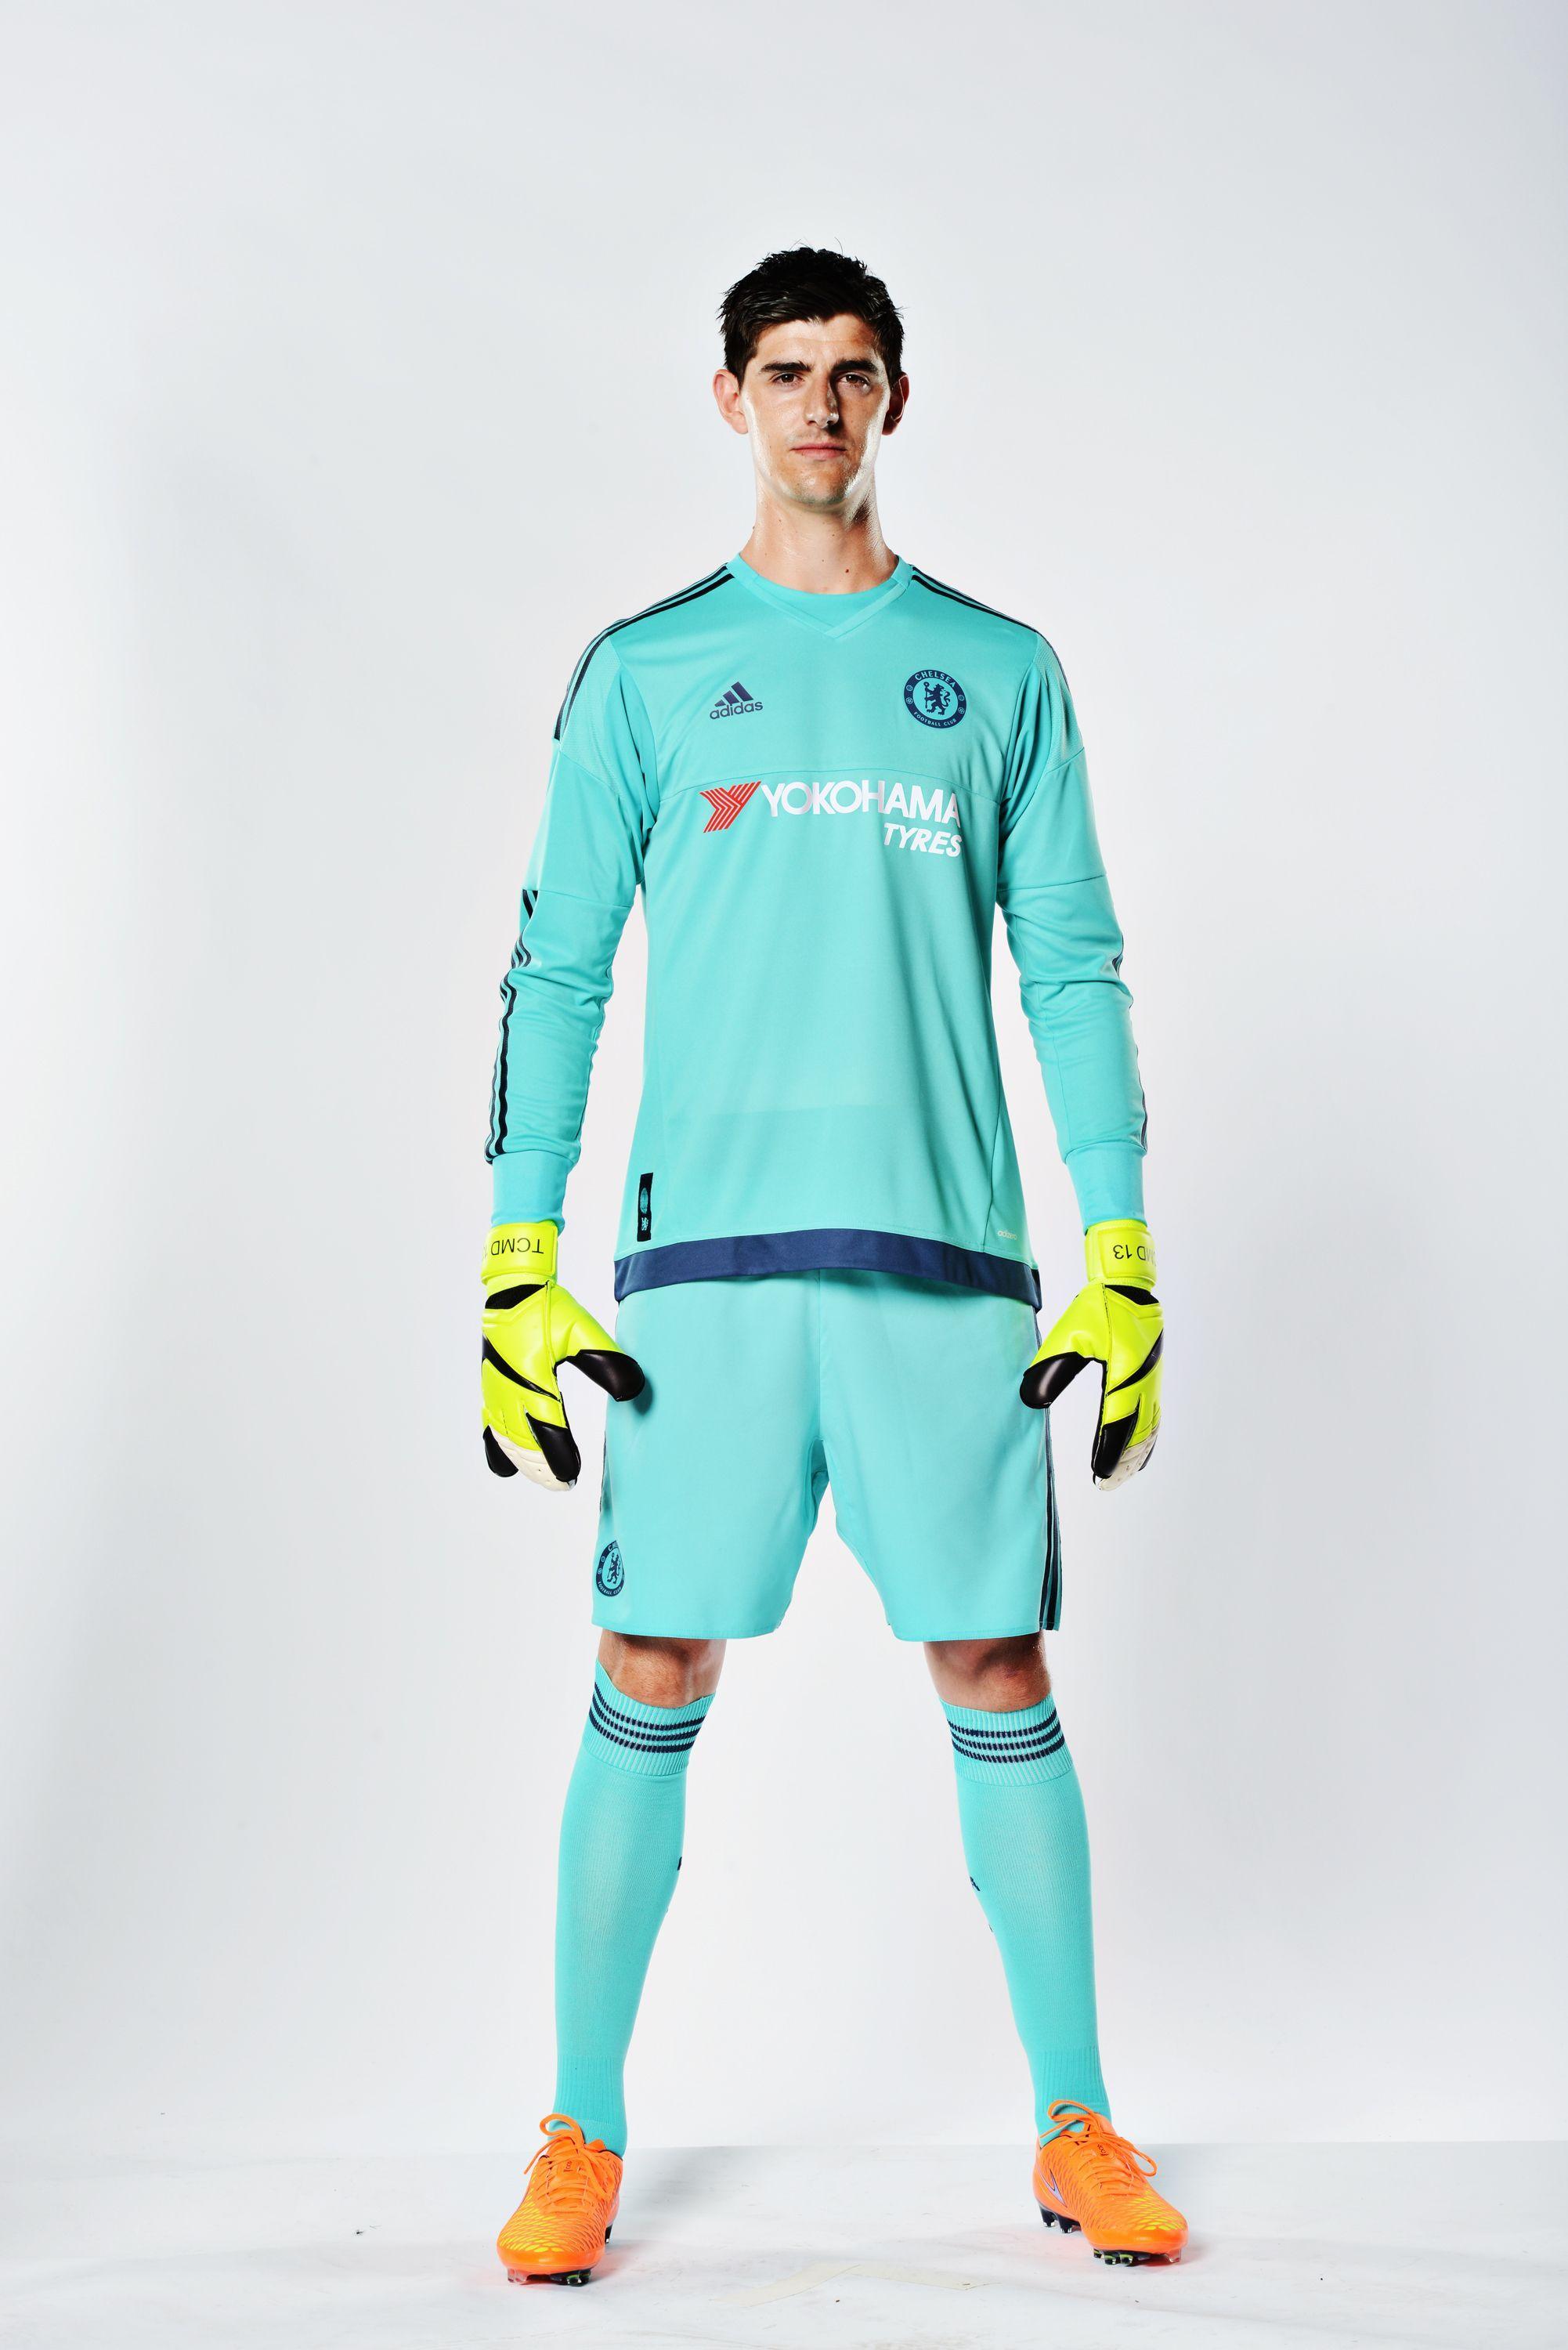 New 2015 16 Home Kit. News. Official Site. Chelsea Football Club